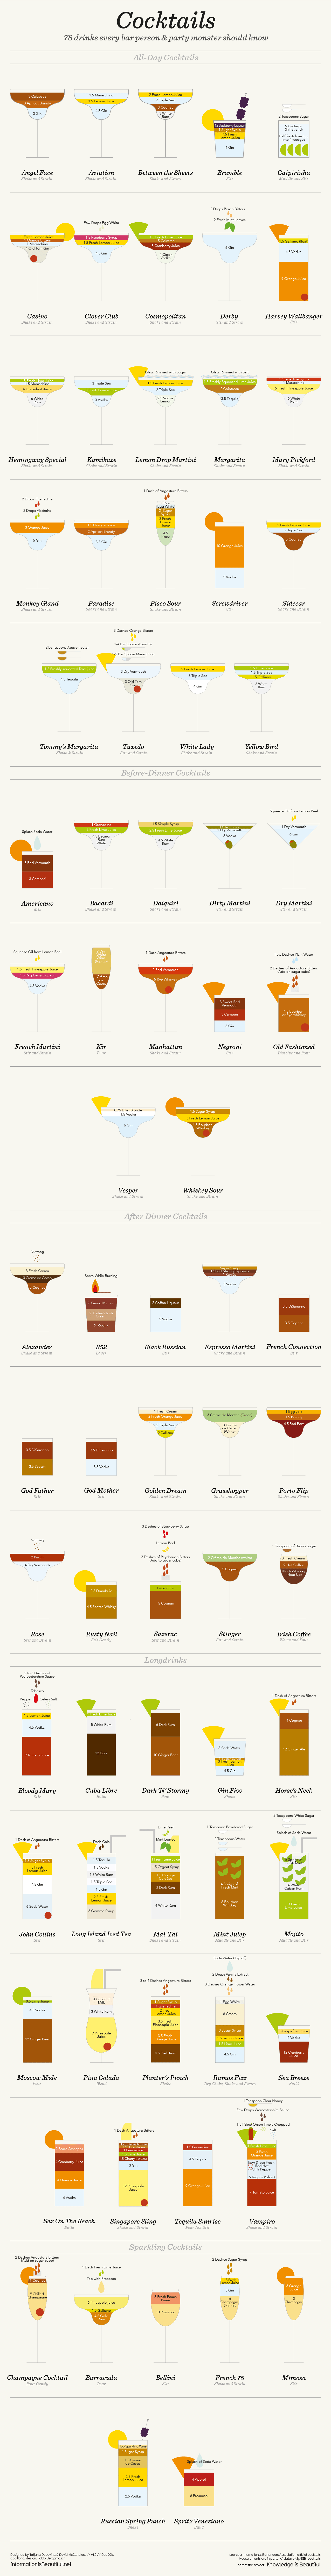 This Cheat Sheet Shows You How To Make Every ‘Official’ Cocktail